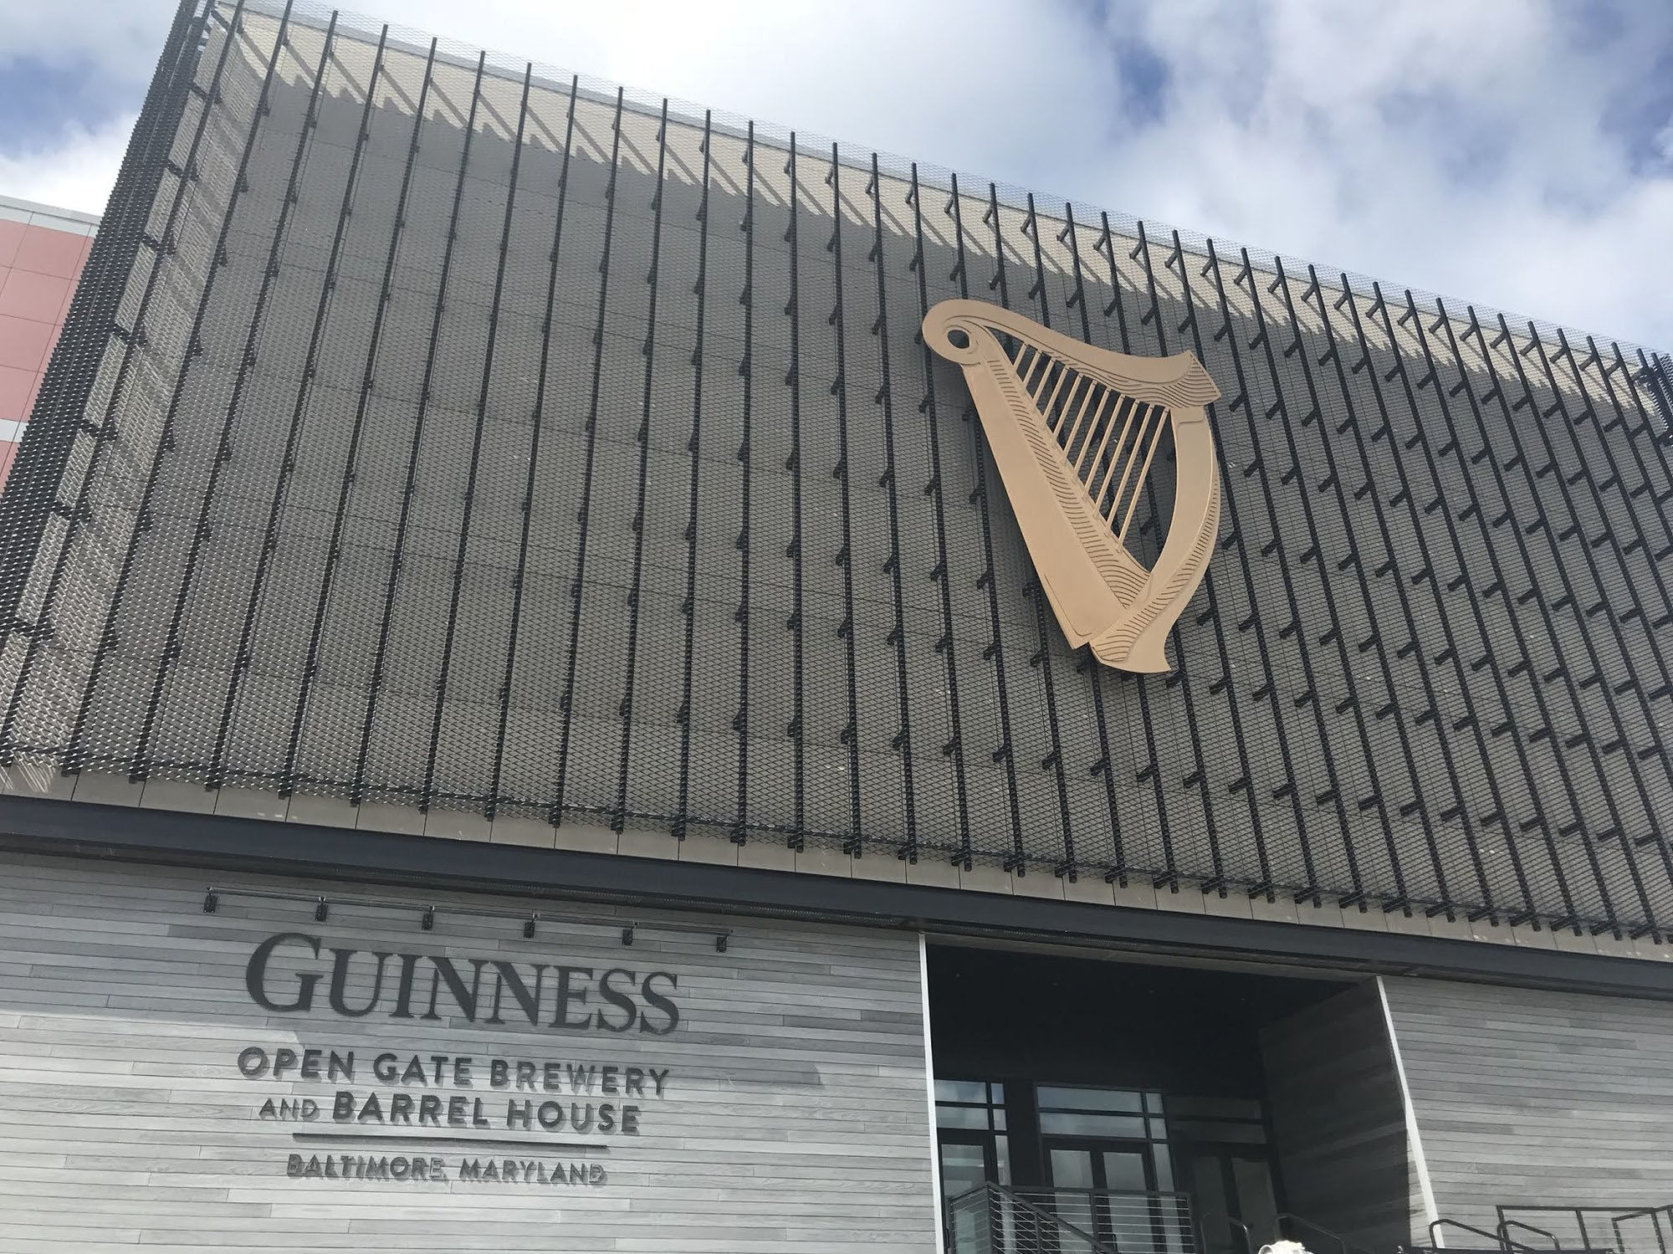 The Guiness Open Gate Brewery and Barrel House opens to the public Aug. 3 at 3 p.m. (Courtesy Maryland governor's office)